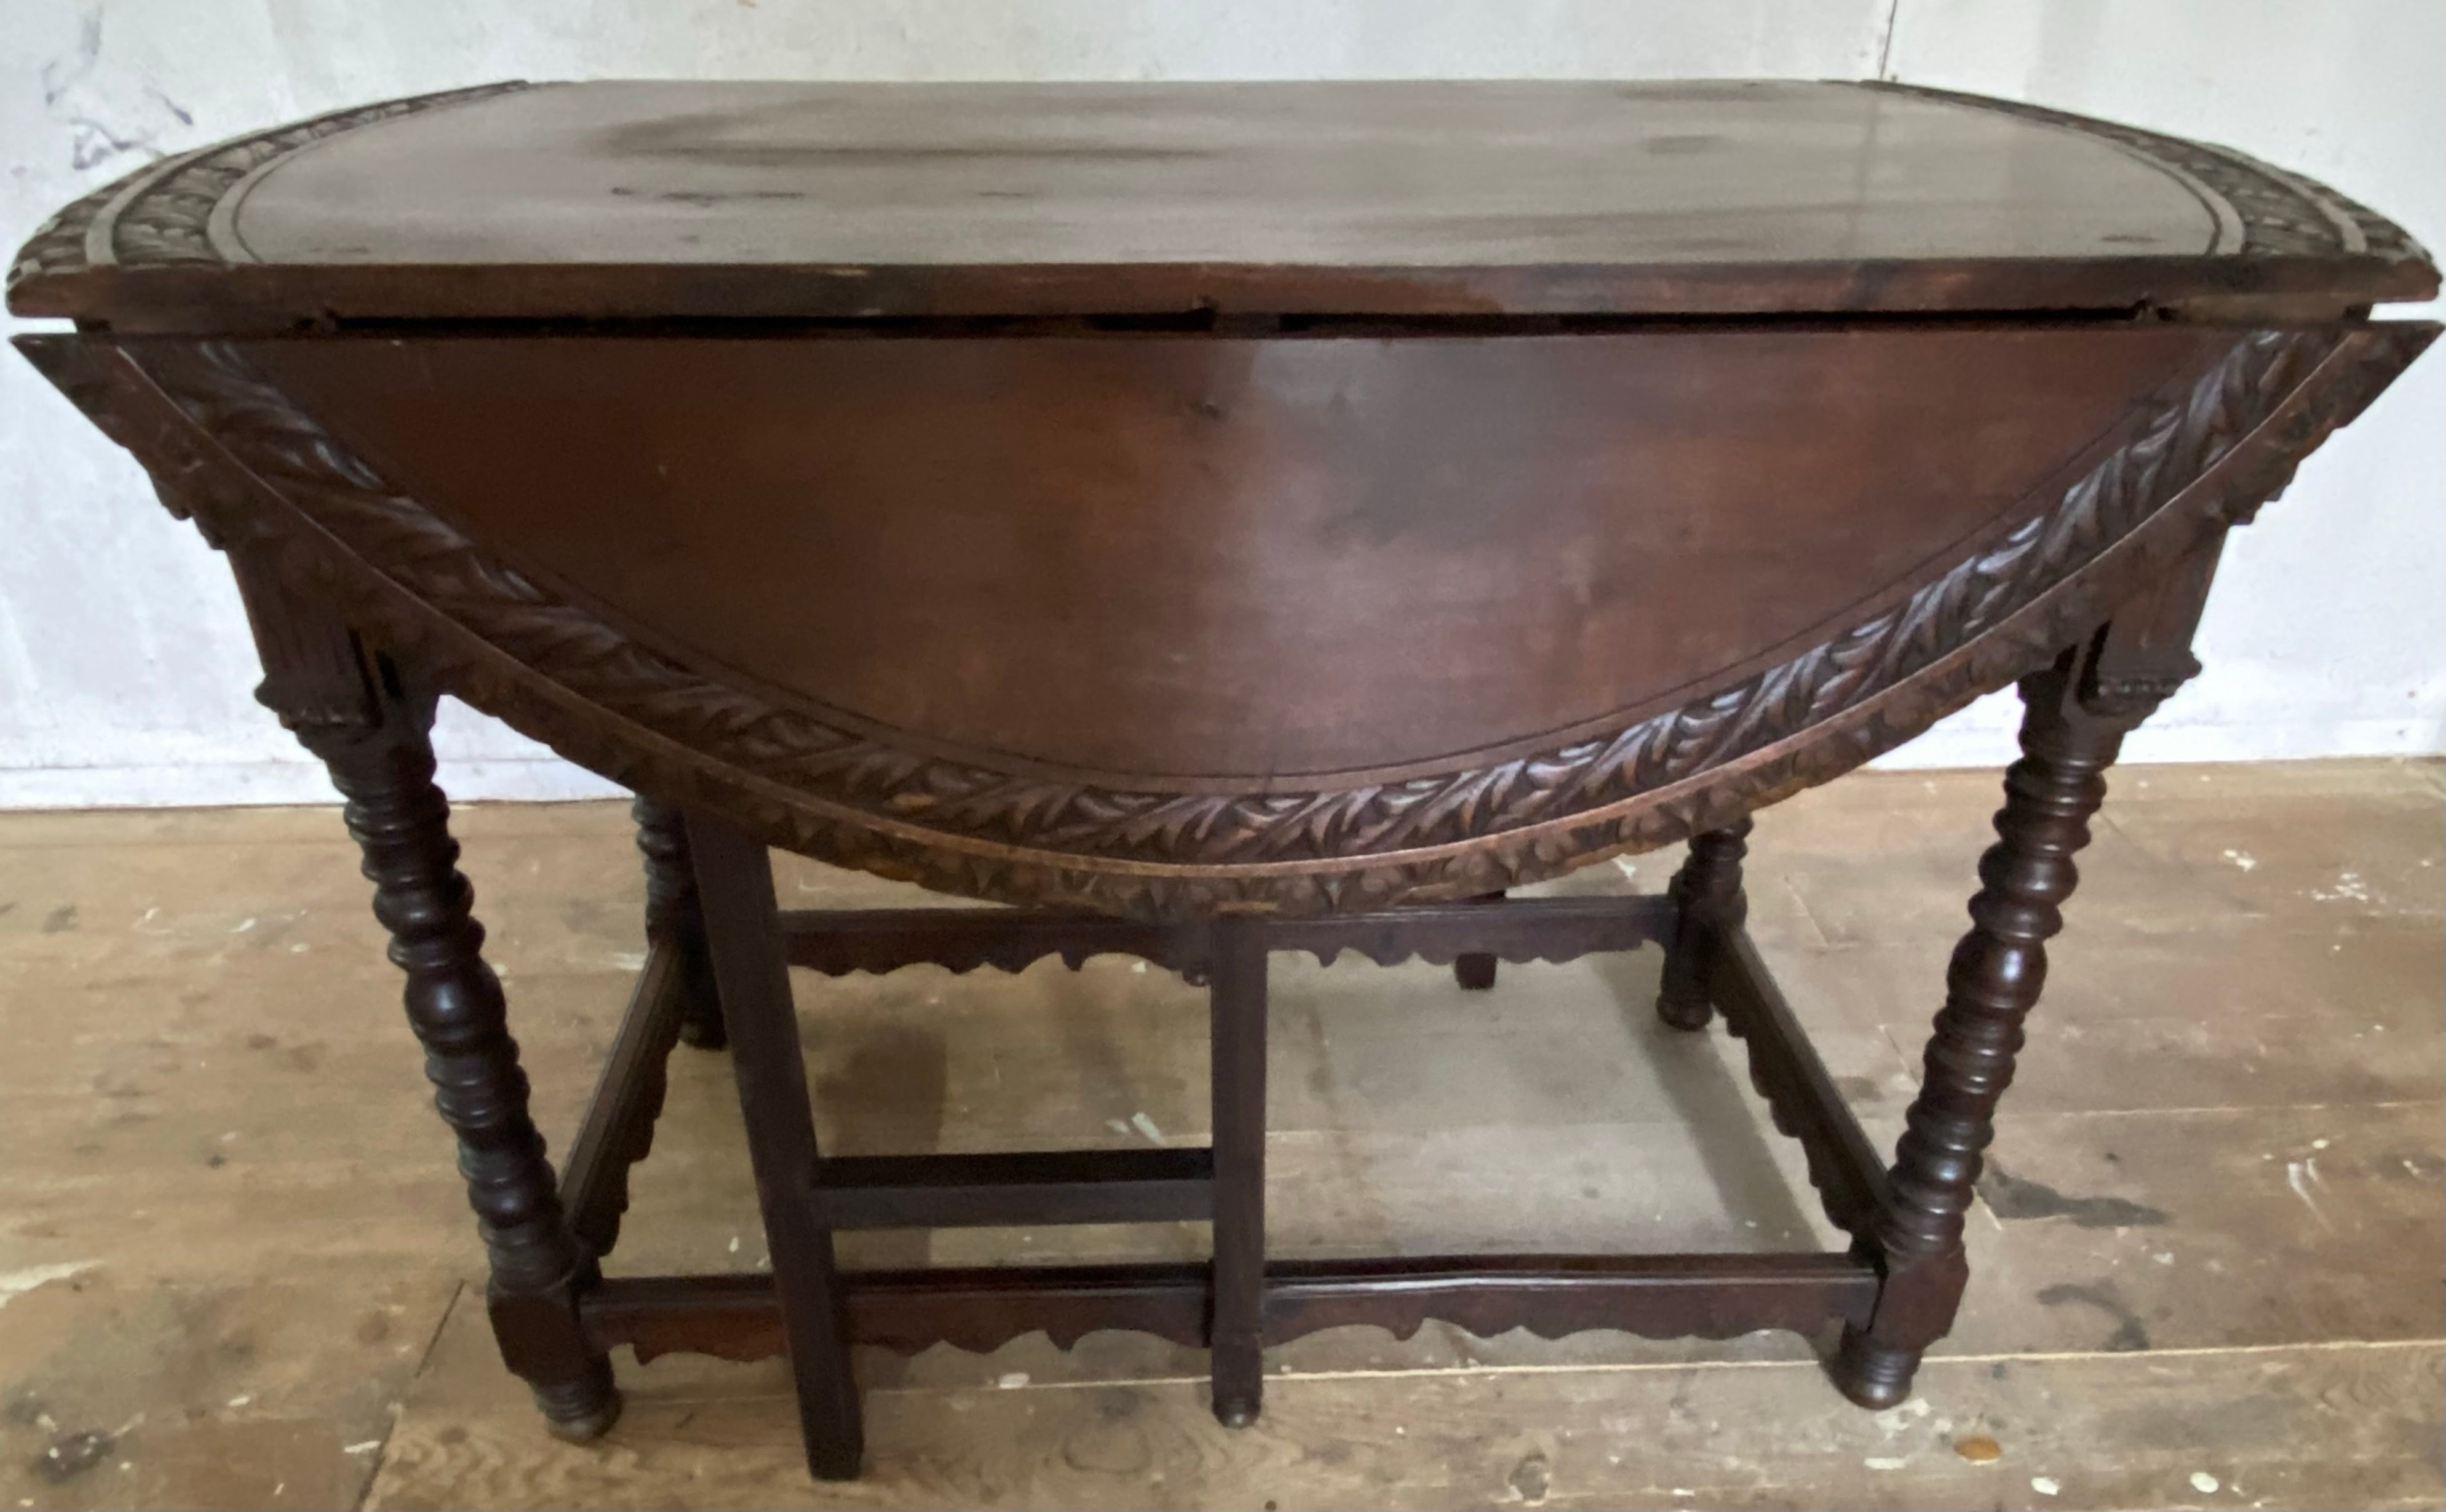 An unusual 19th Century antique, finely carved decorated drop leaf table with turned legs and beautiful aged patina.  The sides of the circular table fold down, allowing it to be easily stored when not in use. or use as sofa table when space is